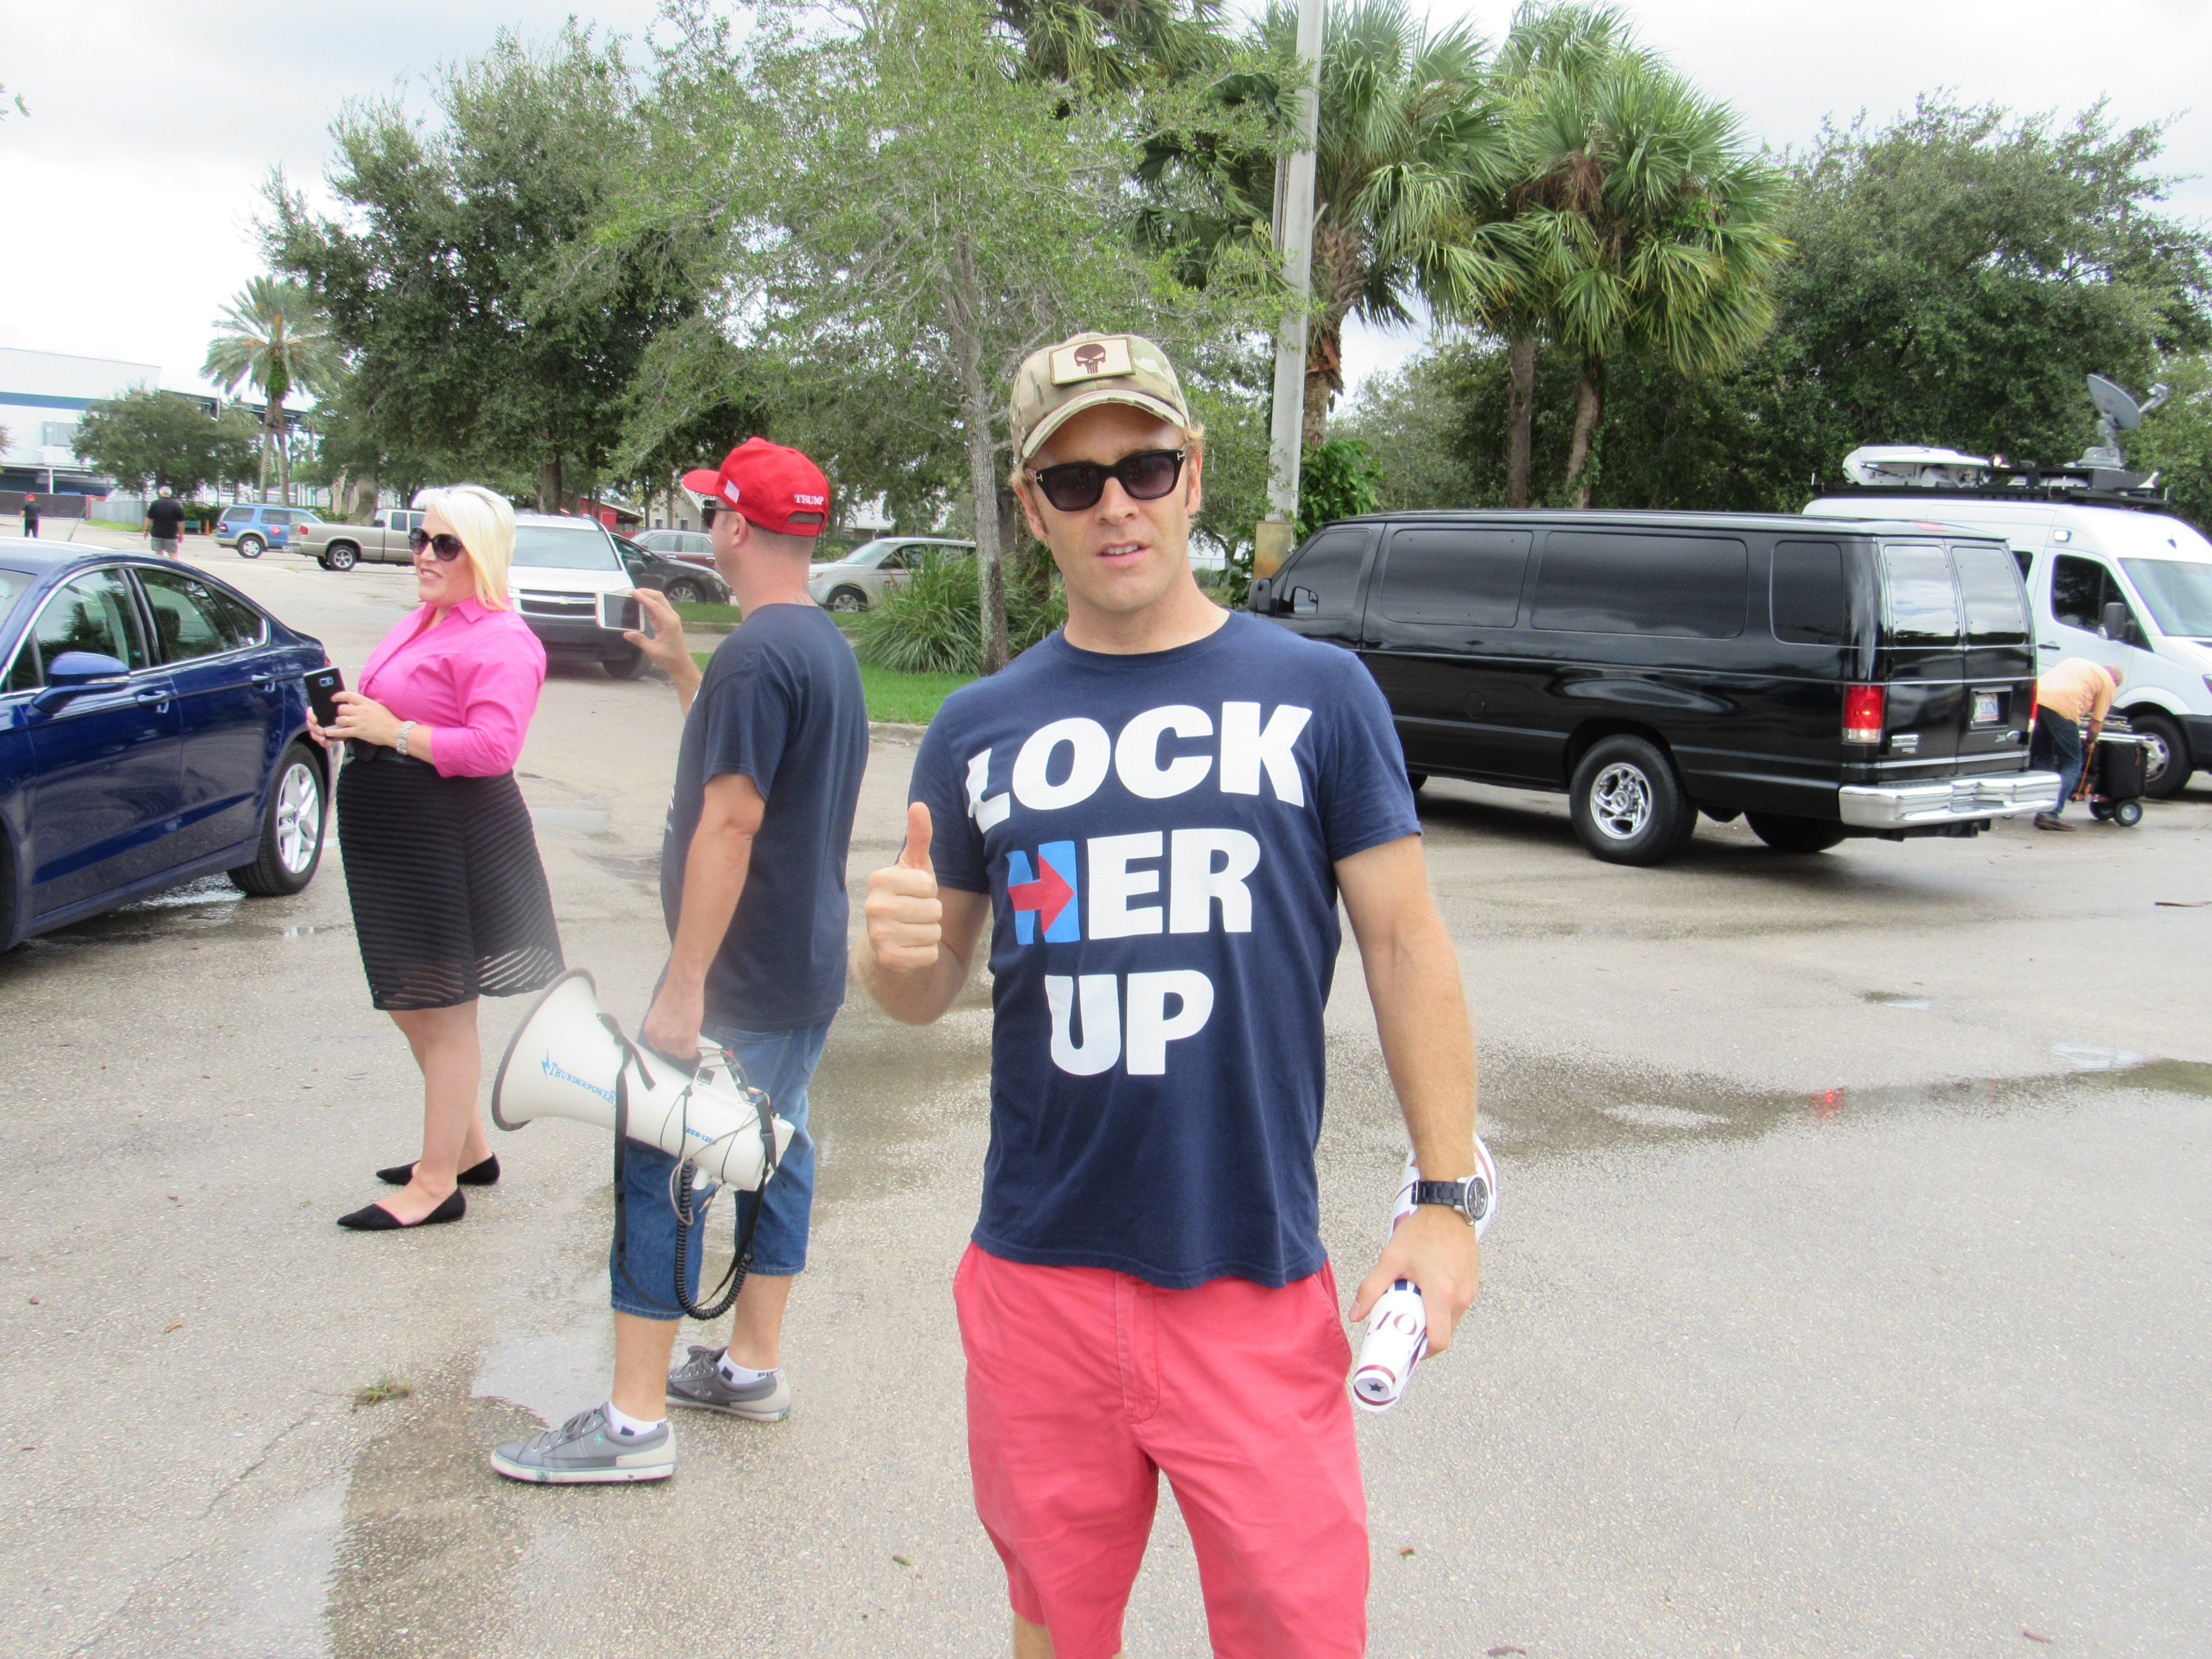 Trump supporter wears 'Lock Her Up' shirt after West Palm Beach rally